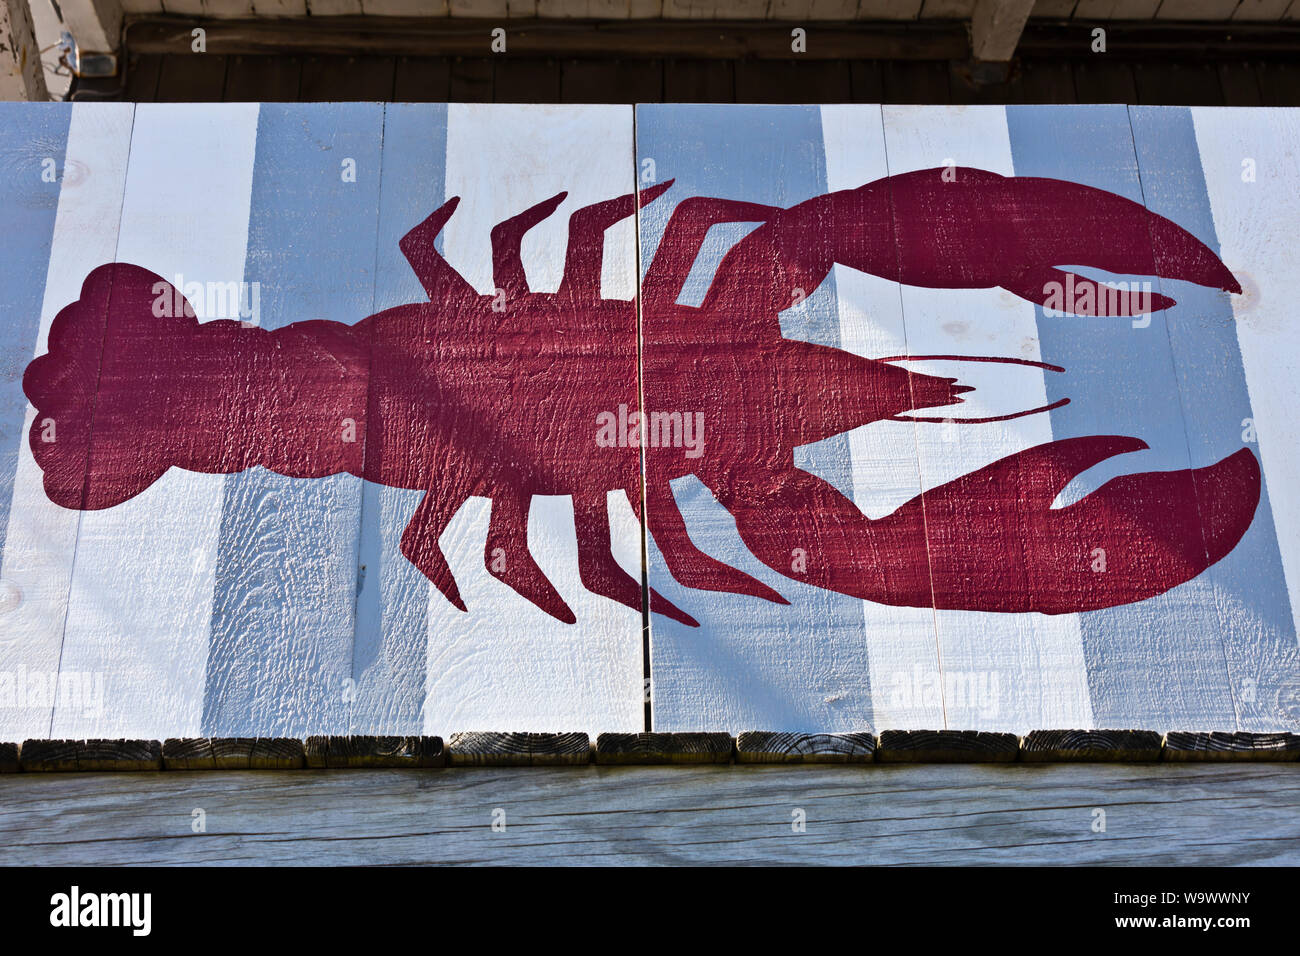 A sign advertising lobster in STONINGTON a major tourist destination - DEER ISLAND, MAINE Stock Photo